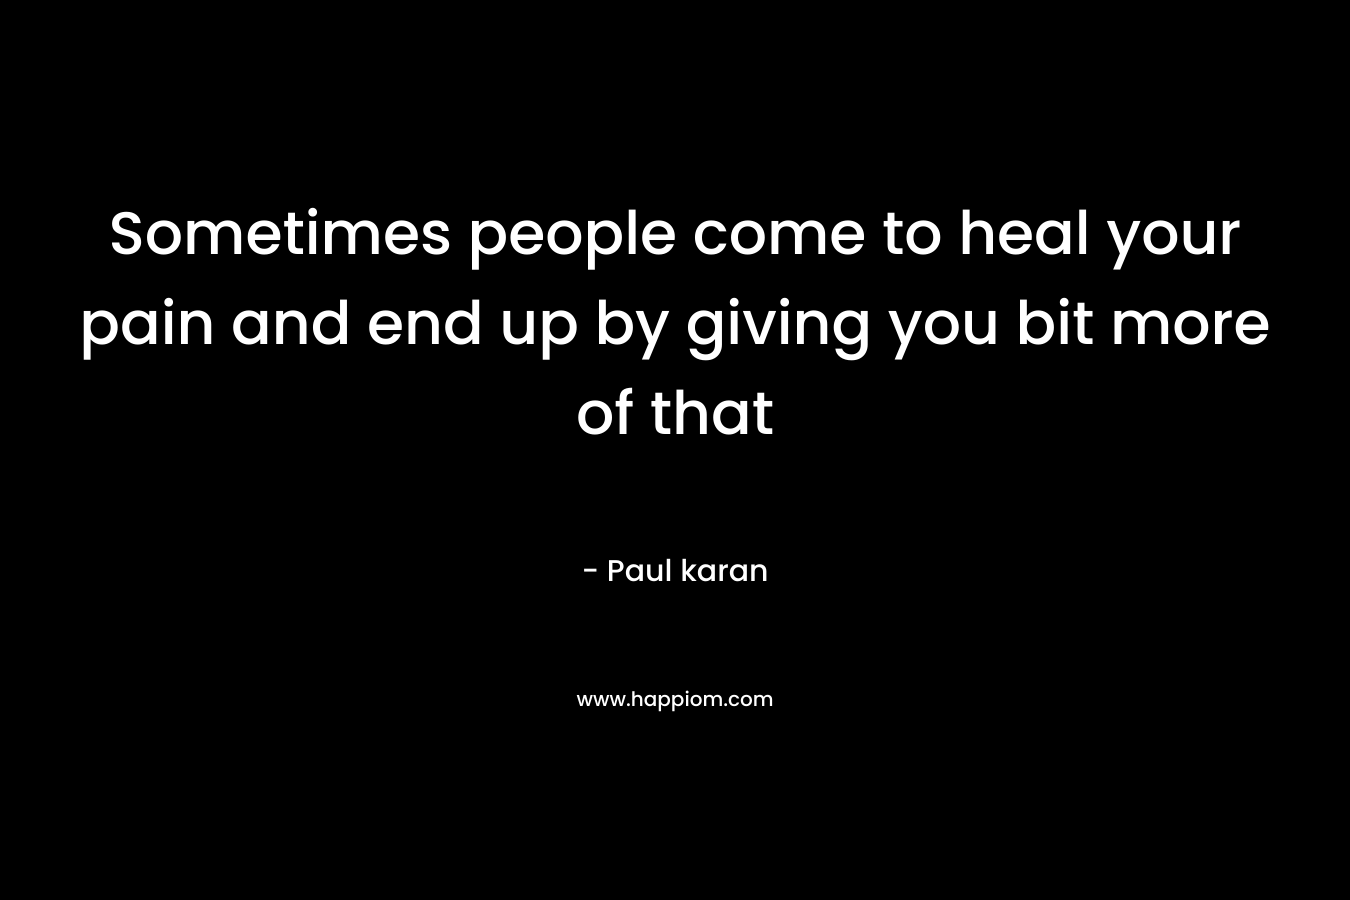 Sometimes people come to heal your pain and end up by giving you bit more of that – Paul karan